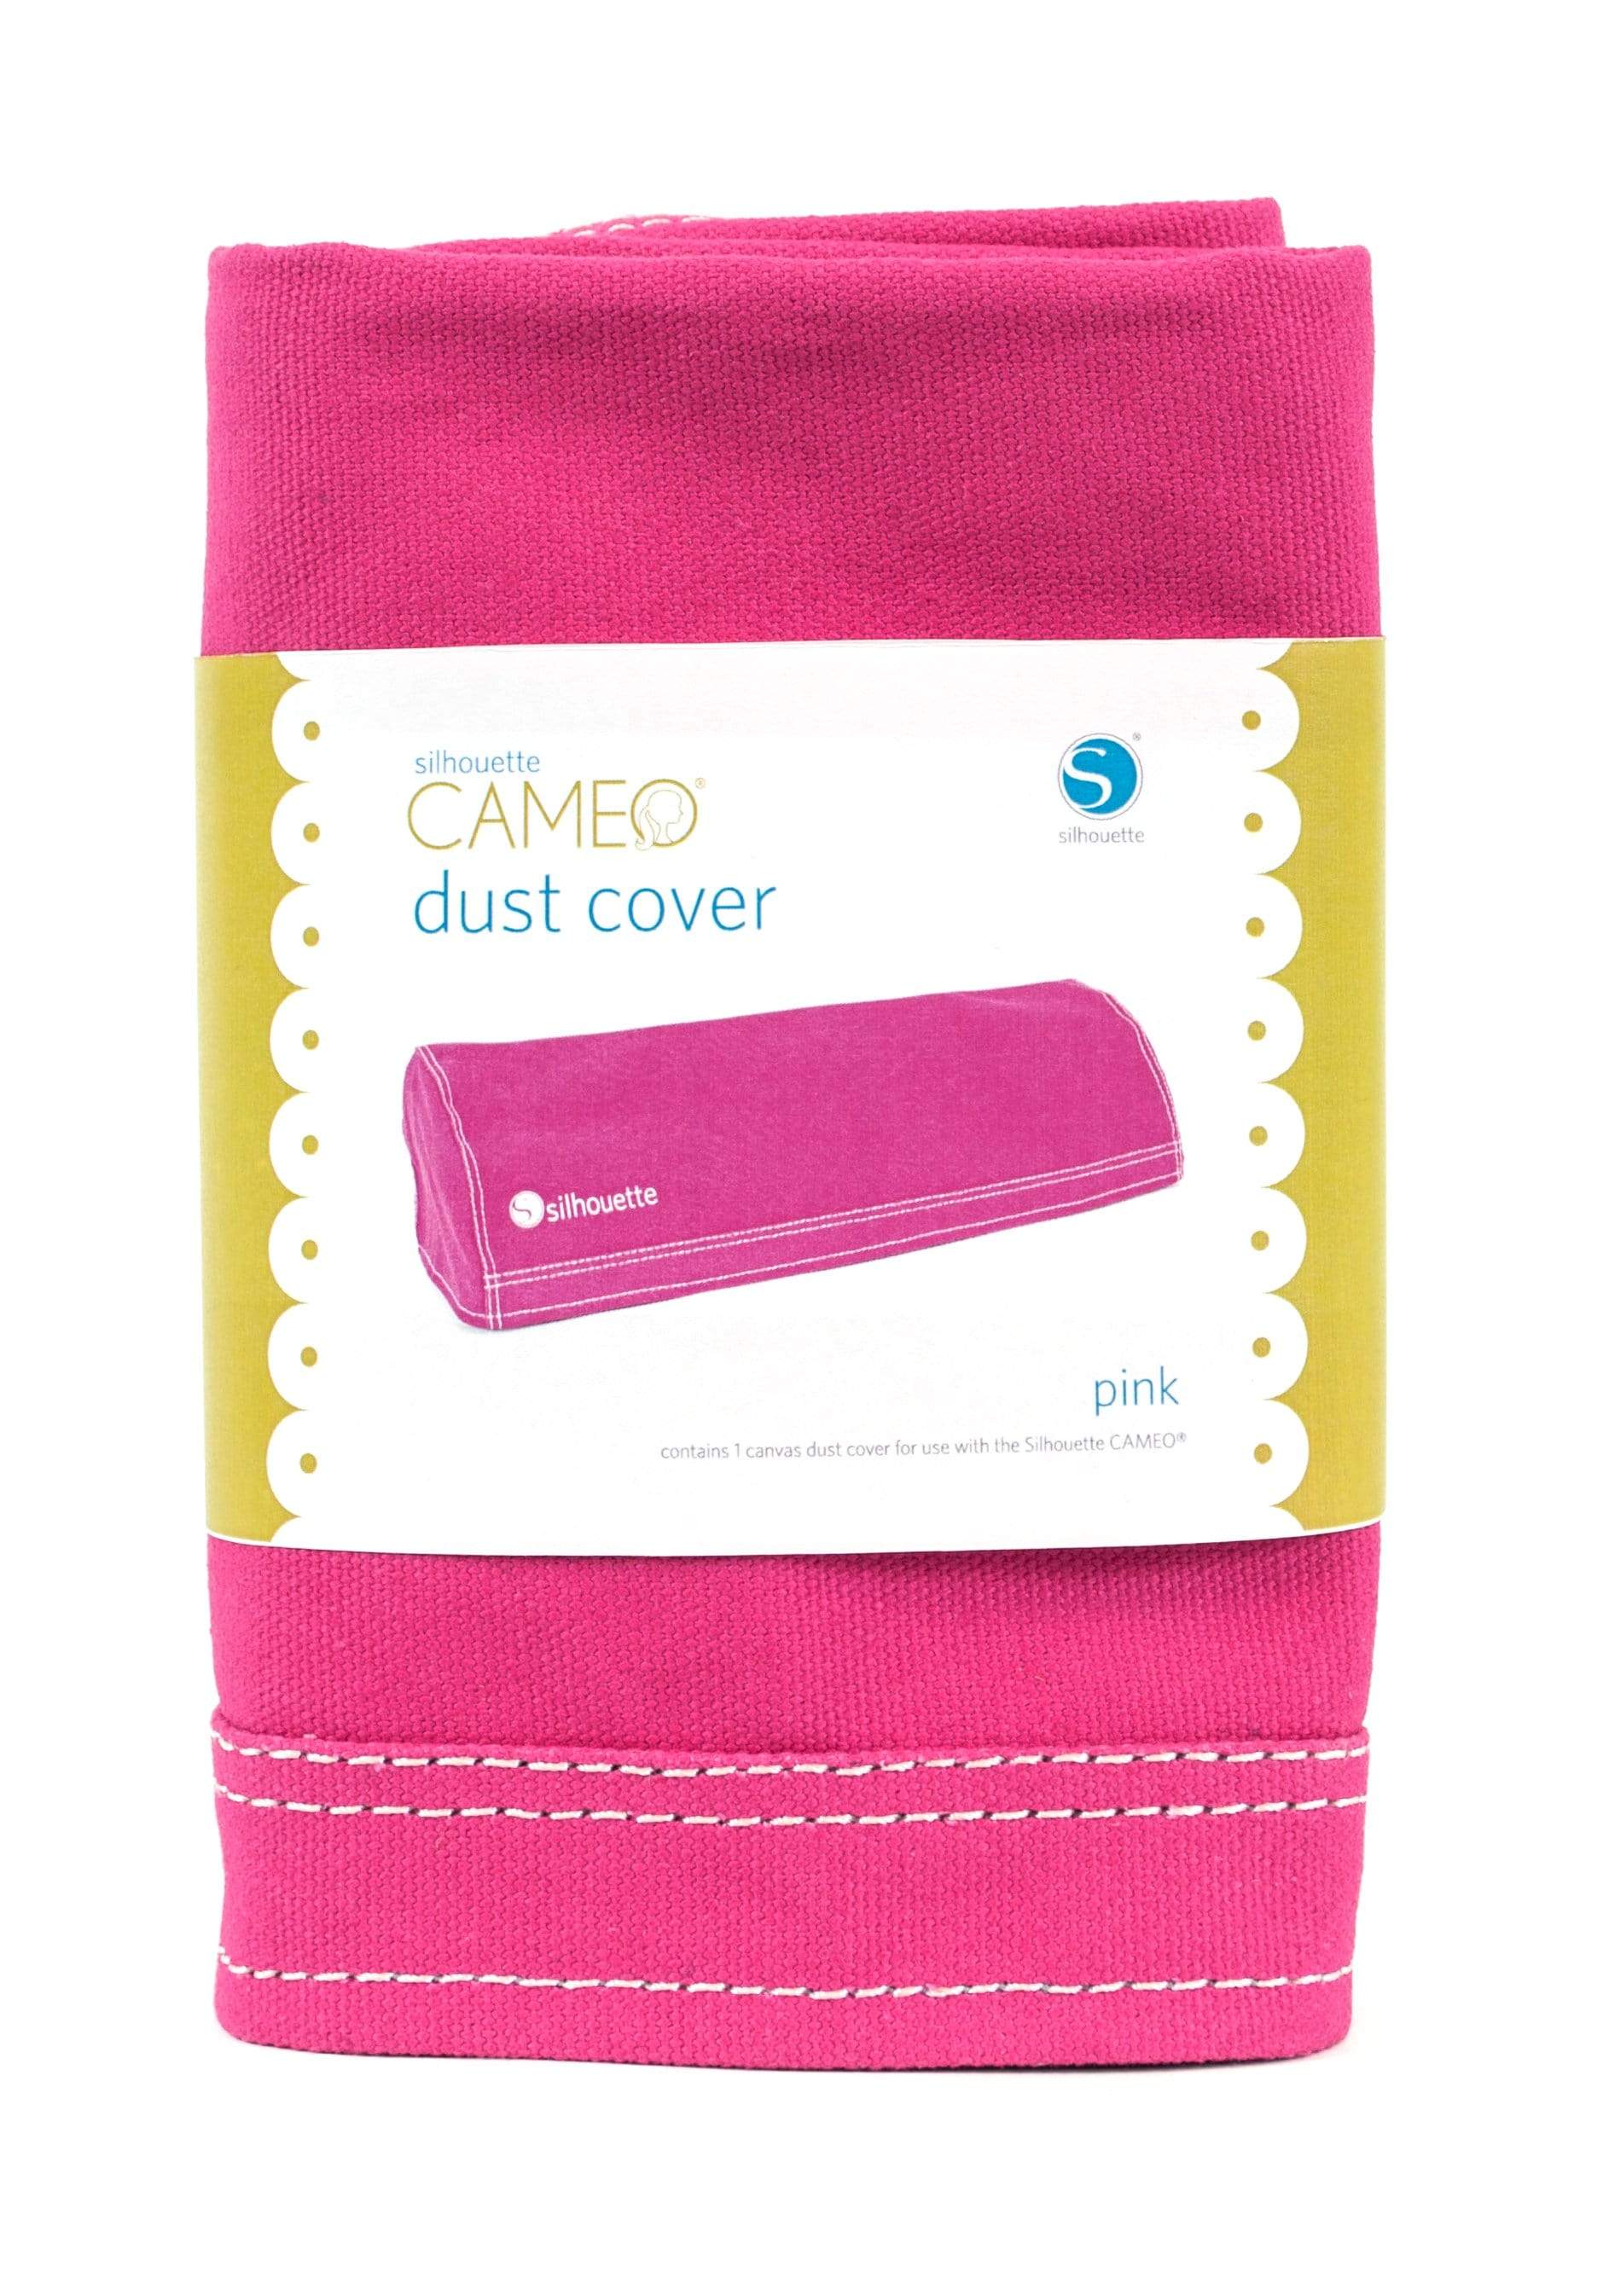 Silhouette America Totes & Dust Covers Pink Silhouette CAMEO 3 dust cover